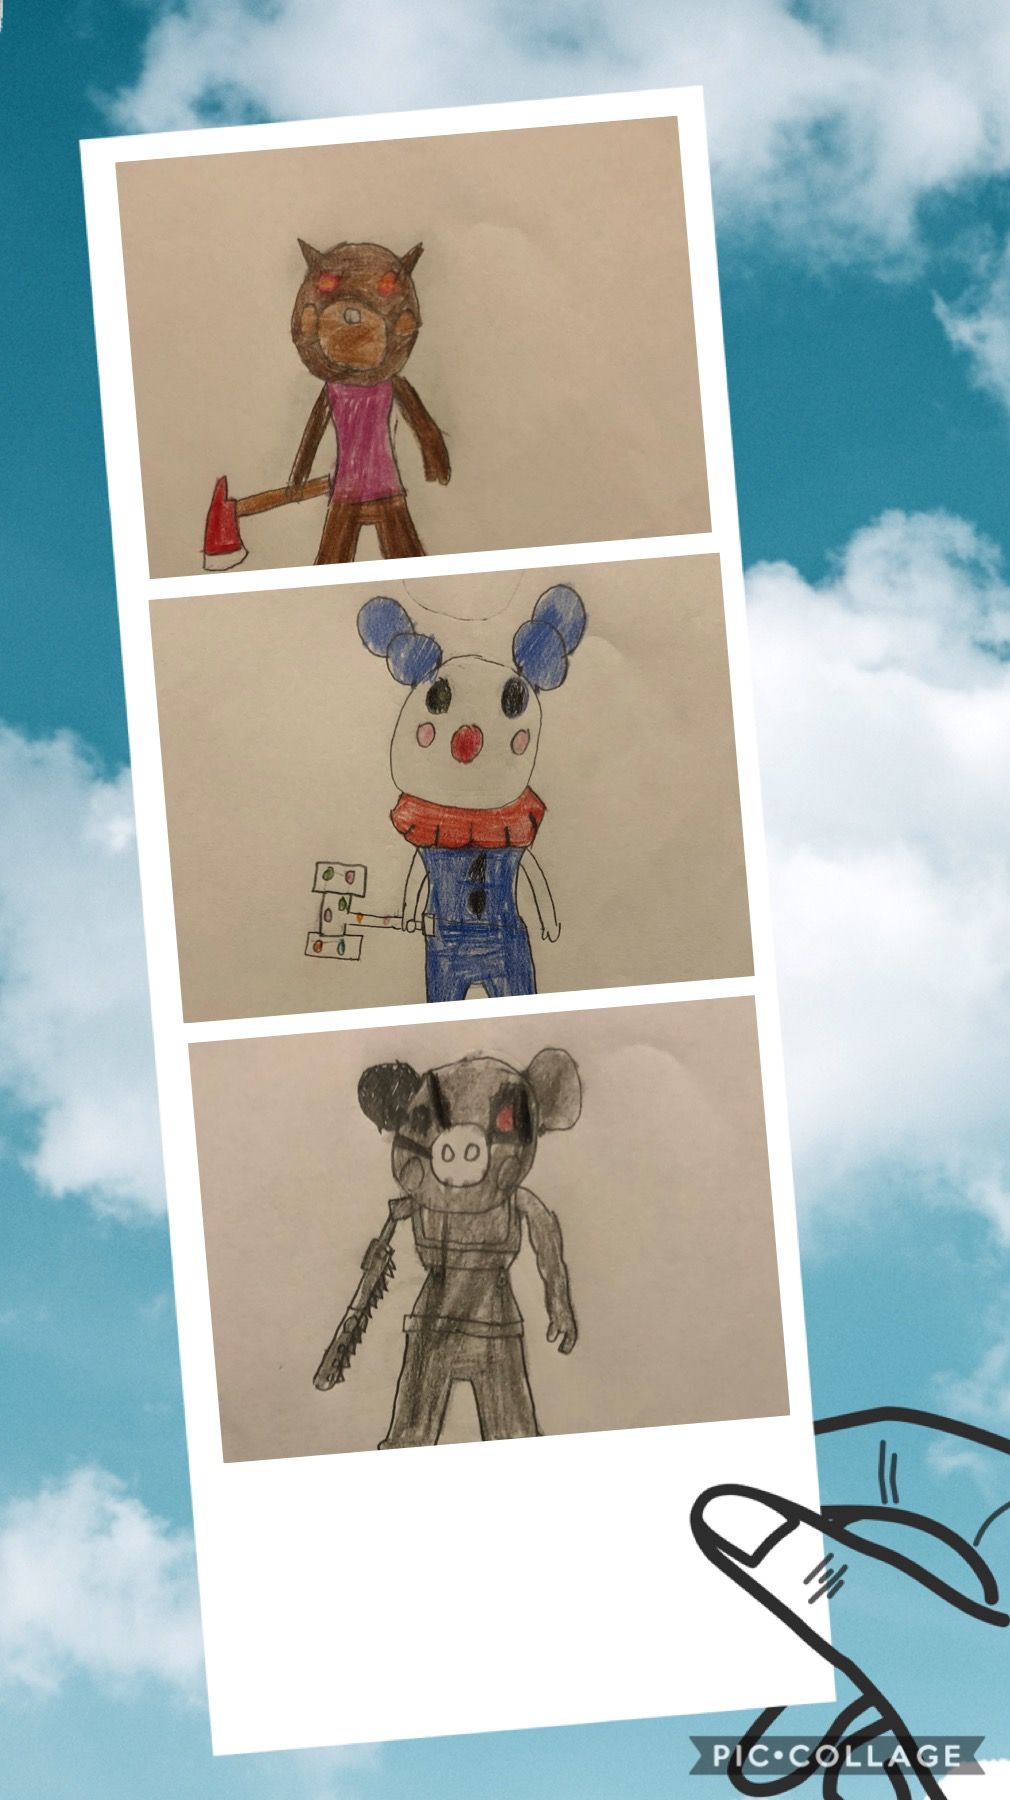 Draw Roblox Piggy Game Characters Small Online Class For Ages 9 14 Outschool - roblox character pencil drawings